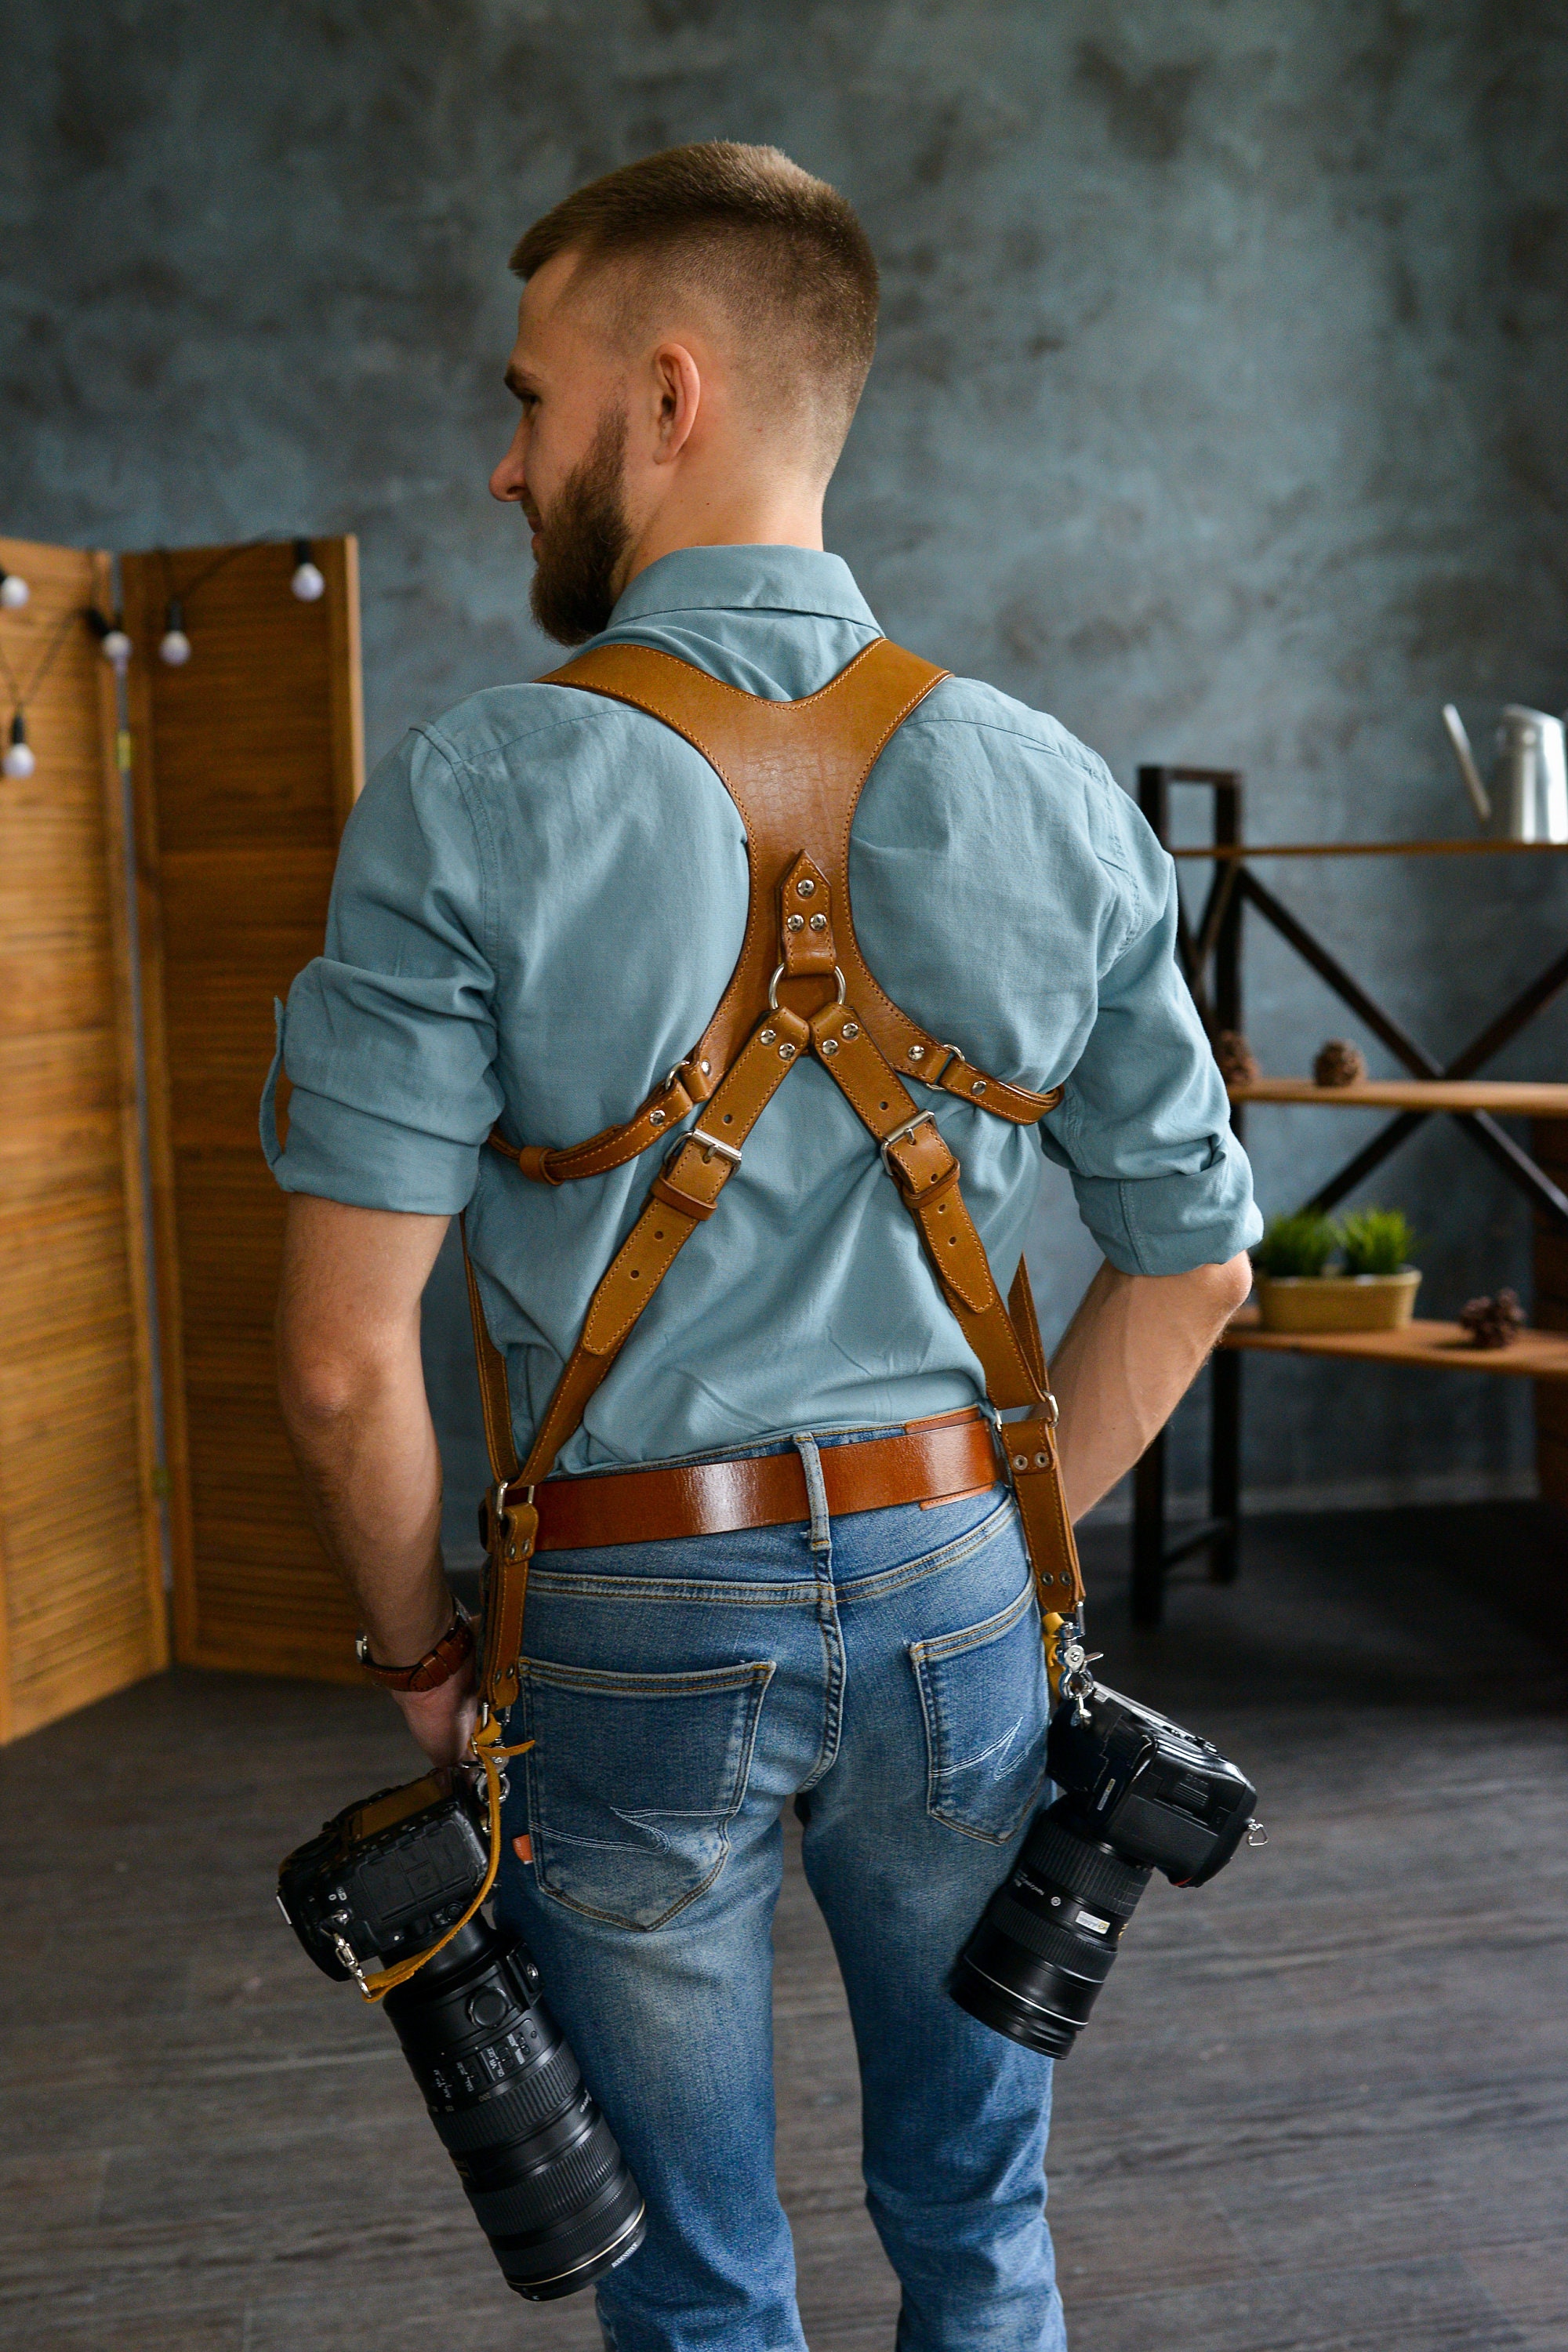 The Dual Camera Harness (***HARNESS ONLY***) – kindlycamerabags